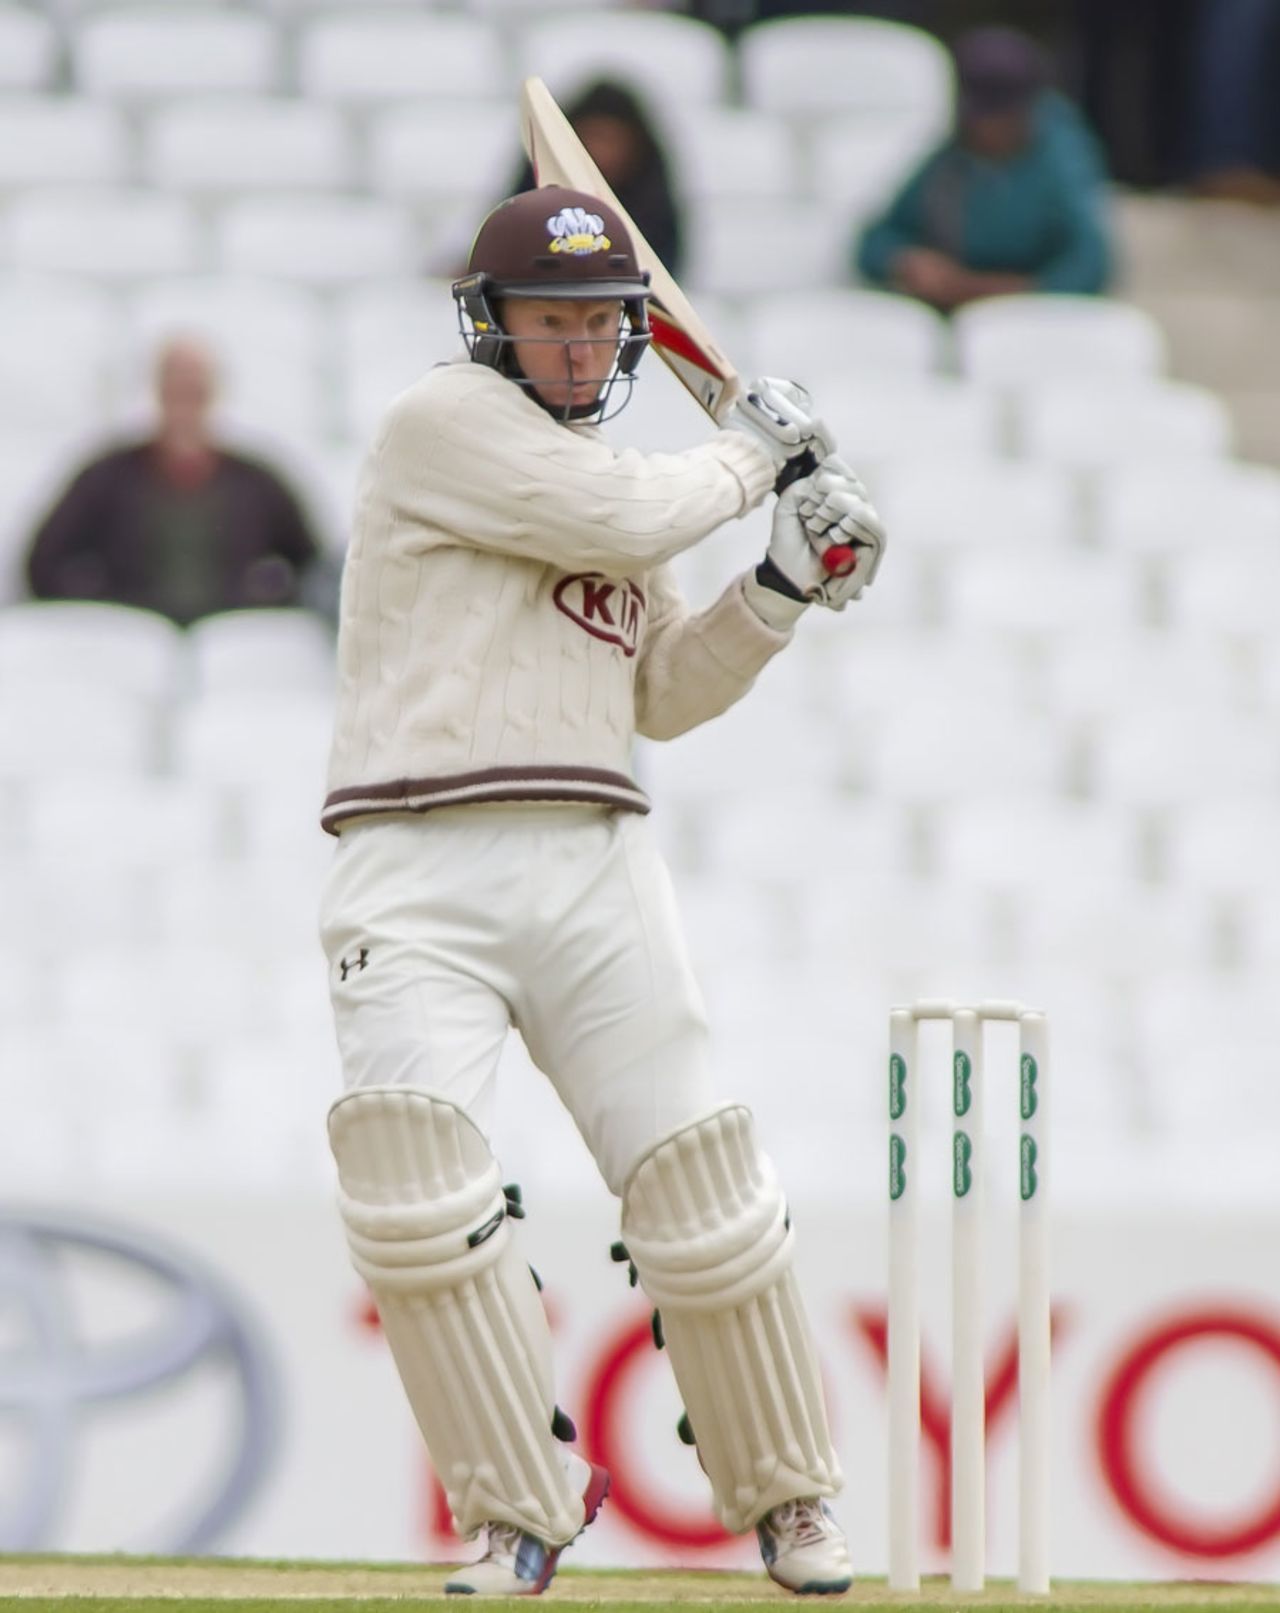 Gareth Batty helped Surrey achieve full batting bonus points, Surrey v Durham, County Championship, Division One, The Oval, 2nd day, May 2, 2016